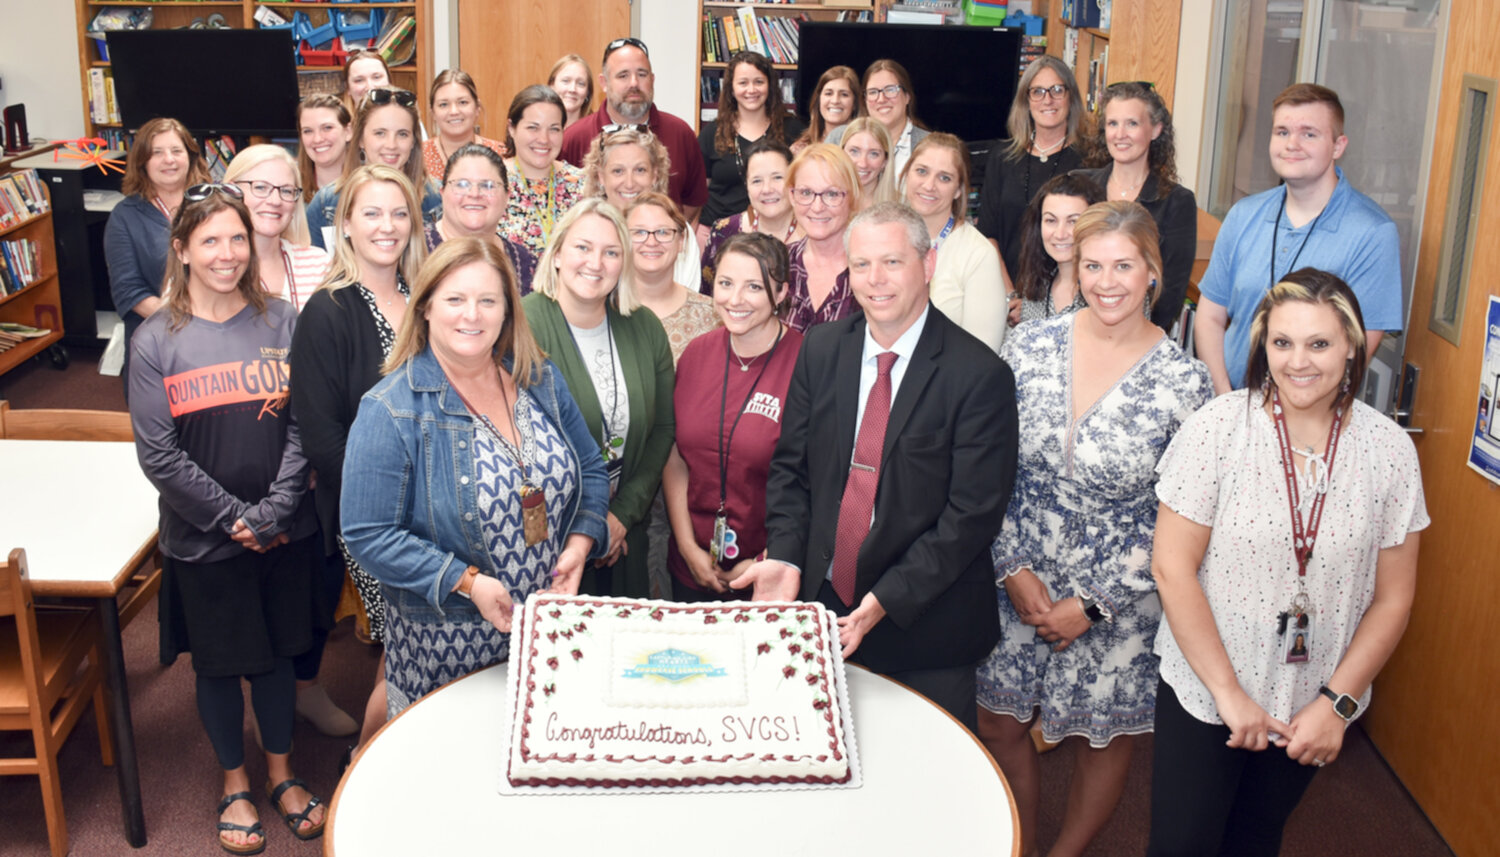 Stockbridge Valley Central School District Superintendent Corey Graves, front right, and Principal Julie Suber, front left, hold corners of a cake along with their elementary school staff. The school was the only district in the state chosen as a National Showcase School for the Capturing Kids’ Hearts framework.